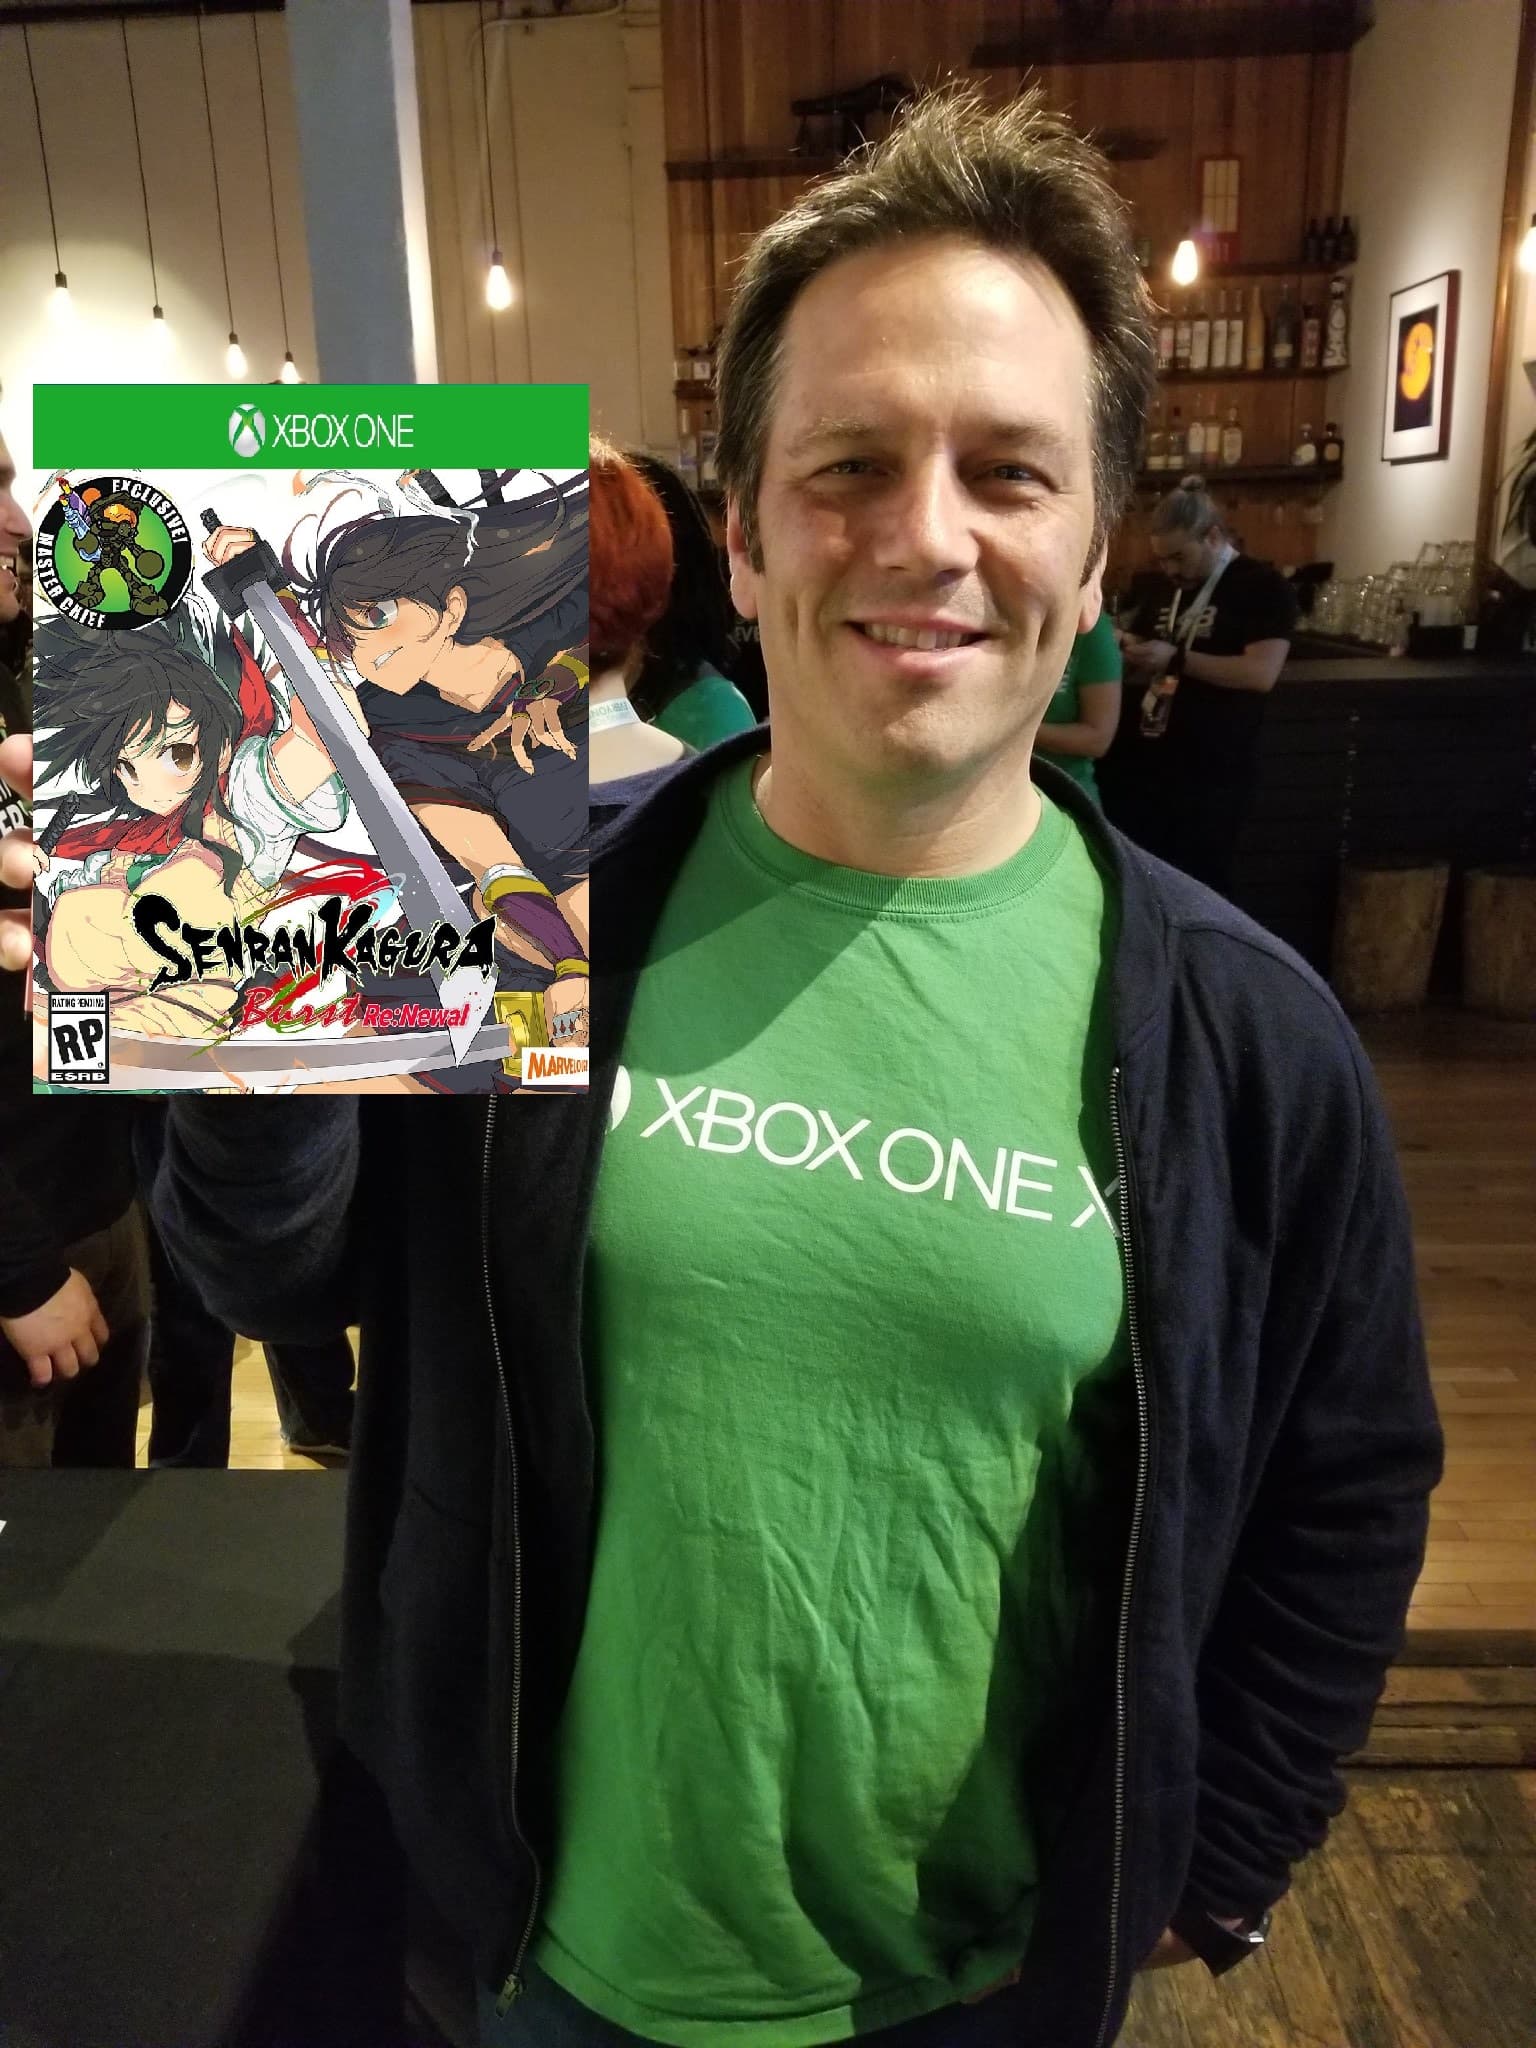 Posts with tags Memes, Phil Spencer 